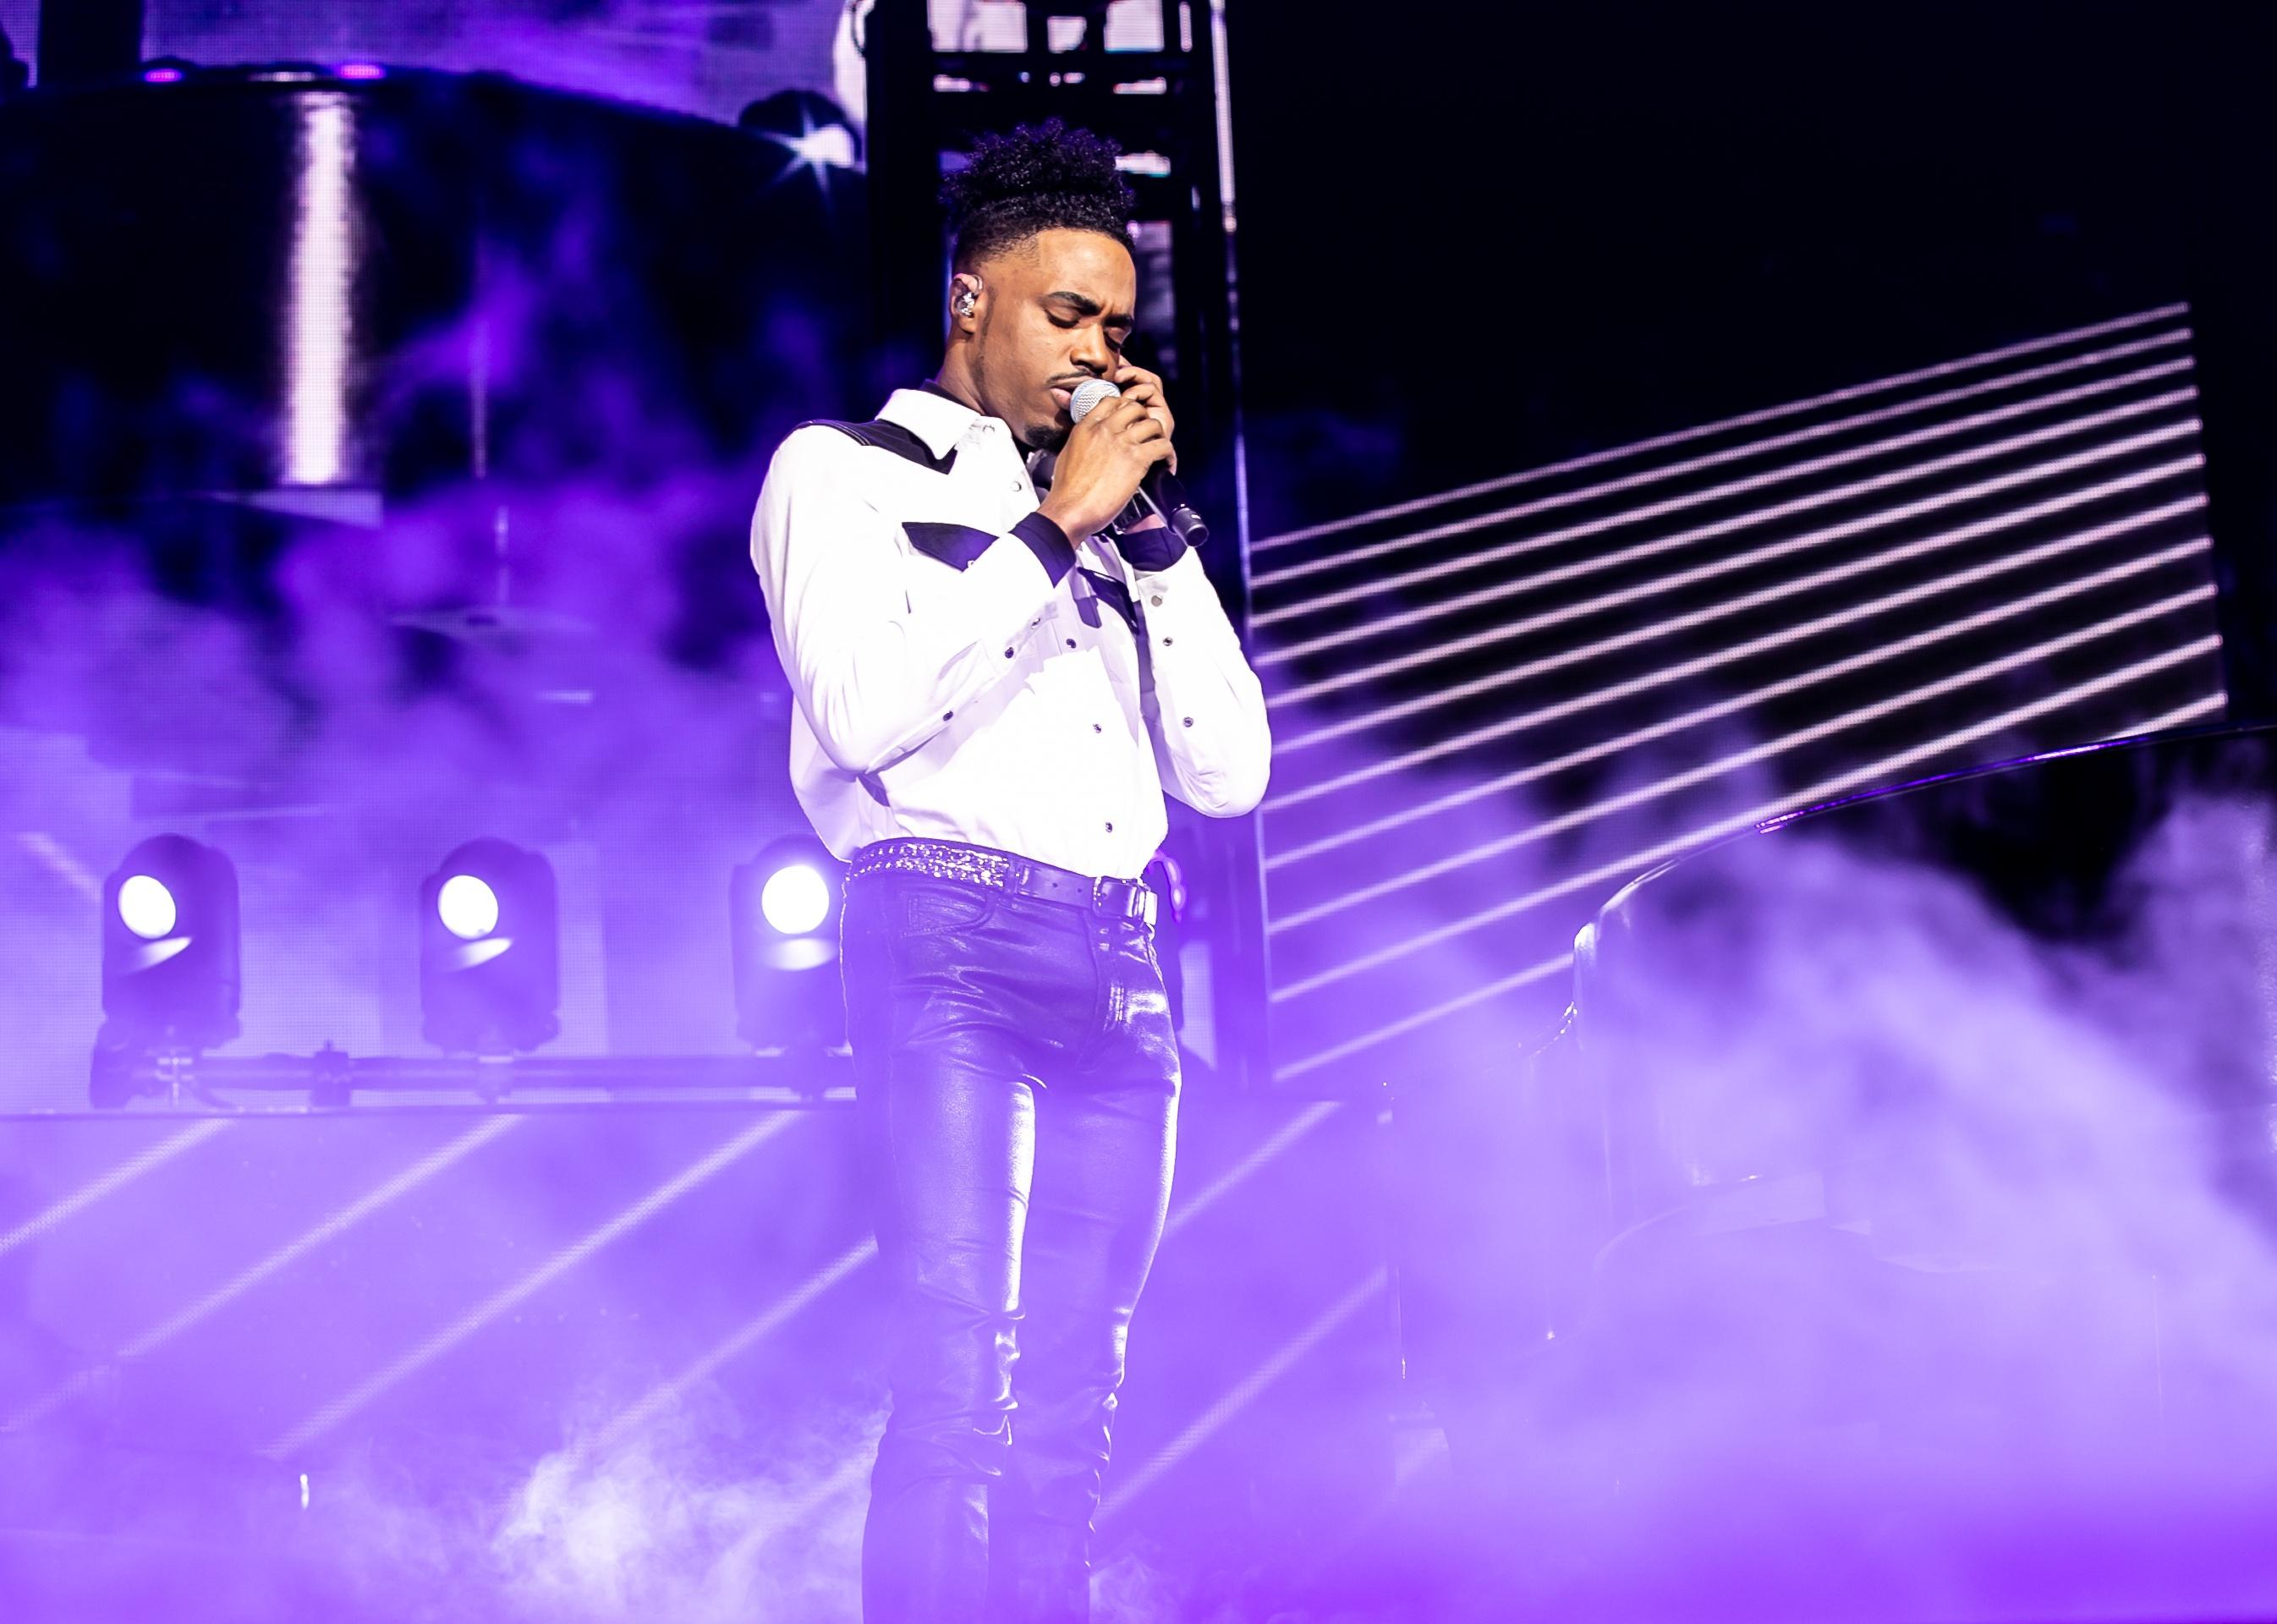 Dalton Harris performs during The X Factor Live Tour on stage.